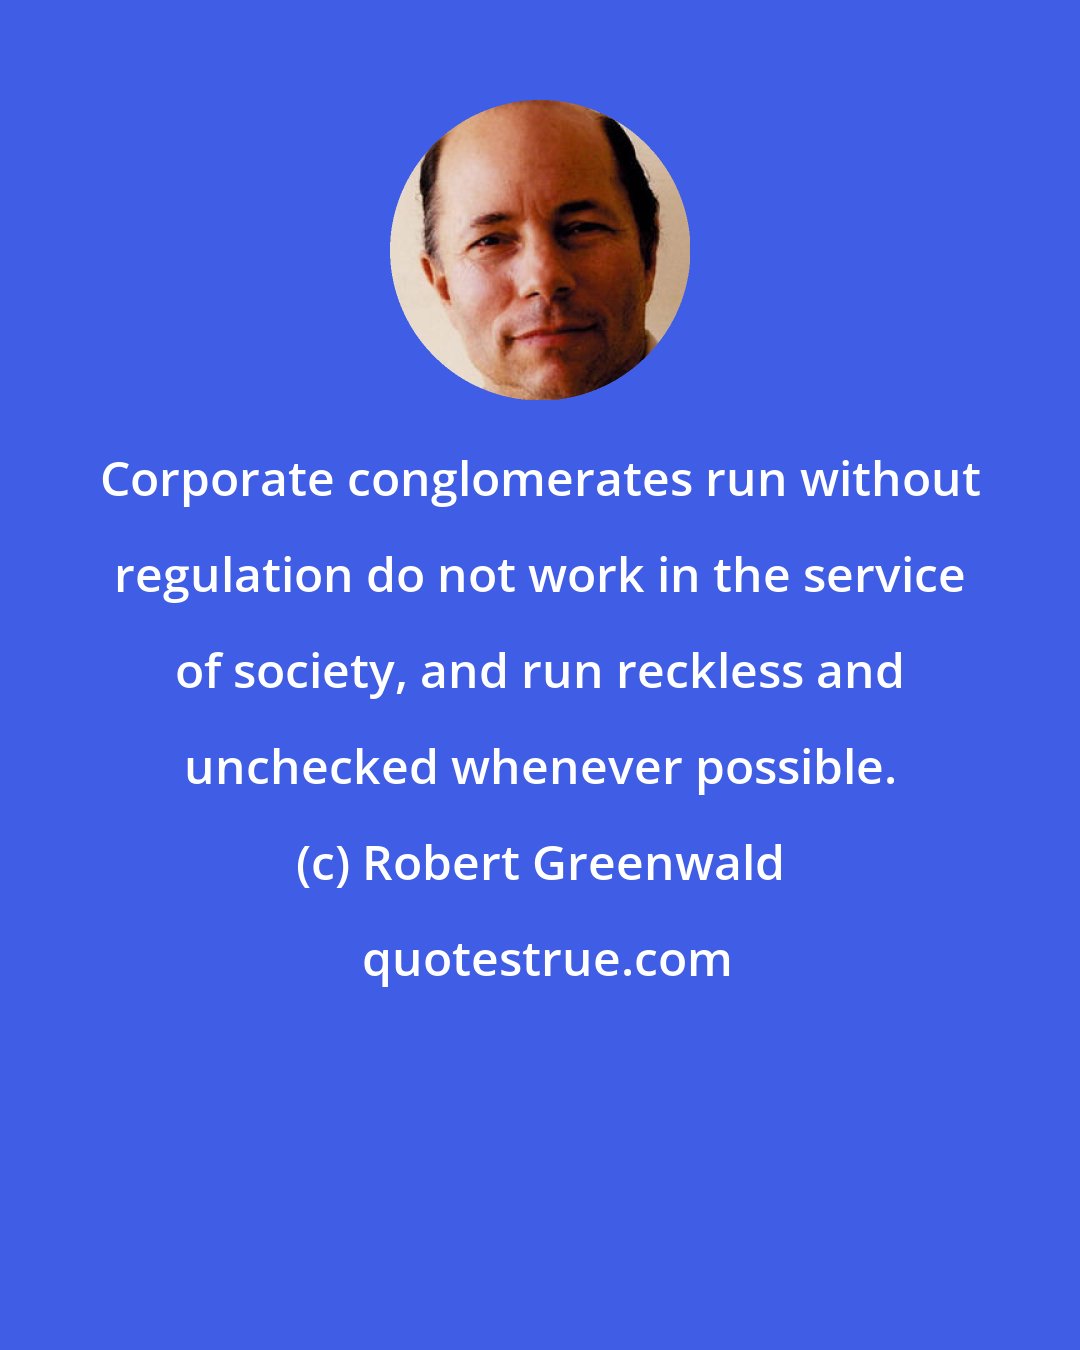 Robert Greenwald: Corporate conglomerates run without regulation do not work in the service of society, and run reckless and unchecked whenever possible.